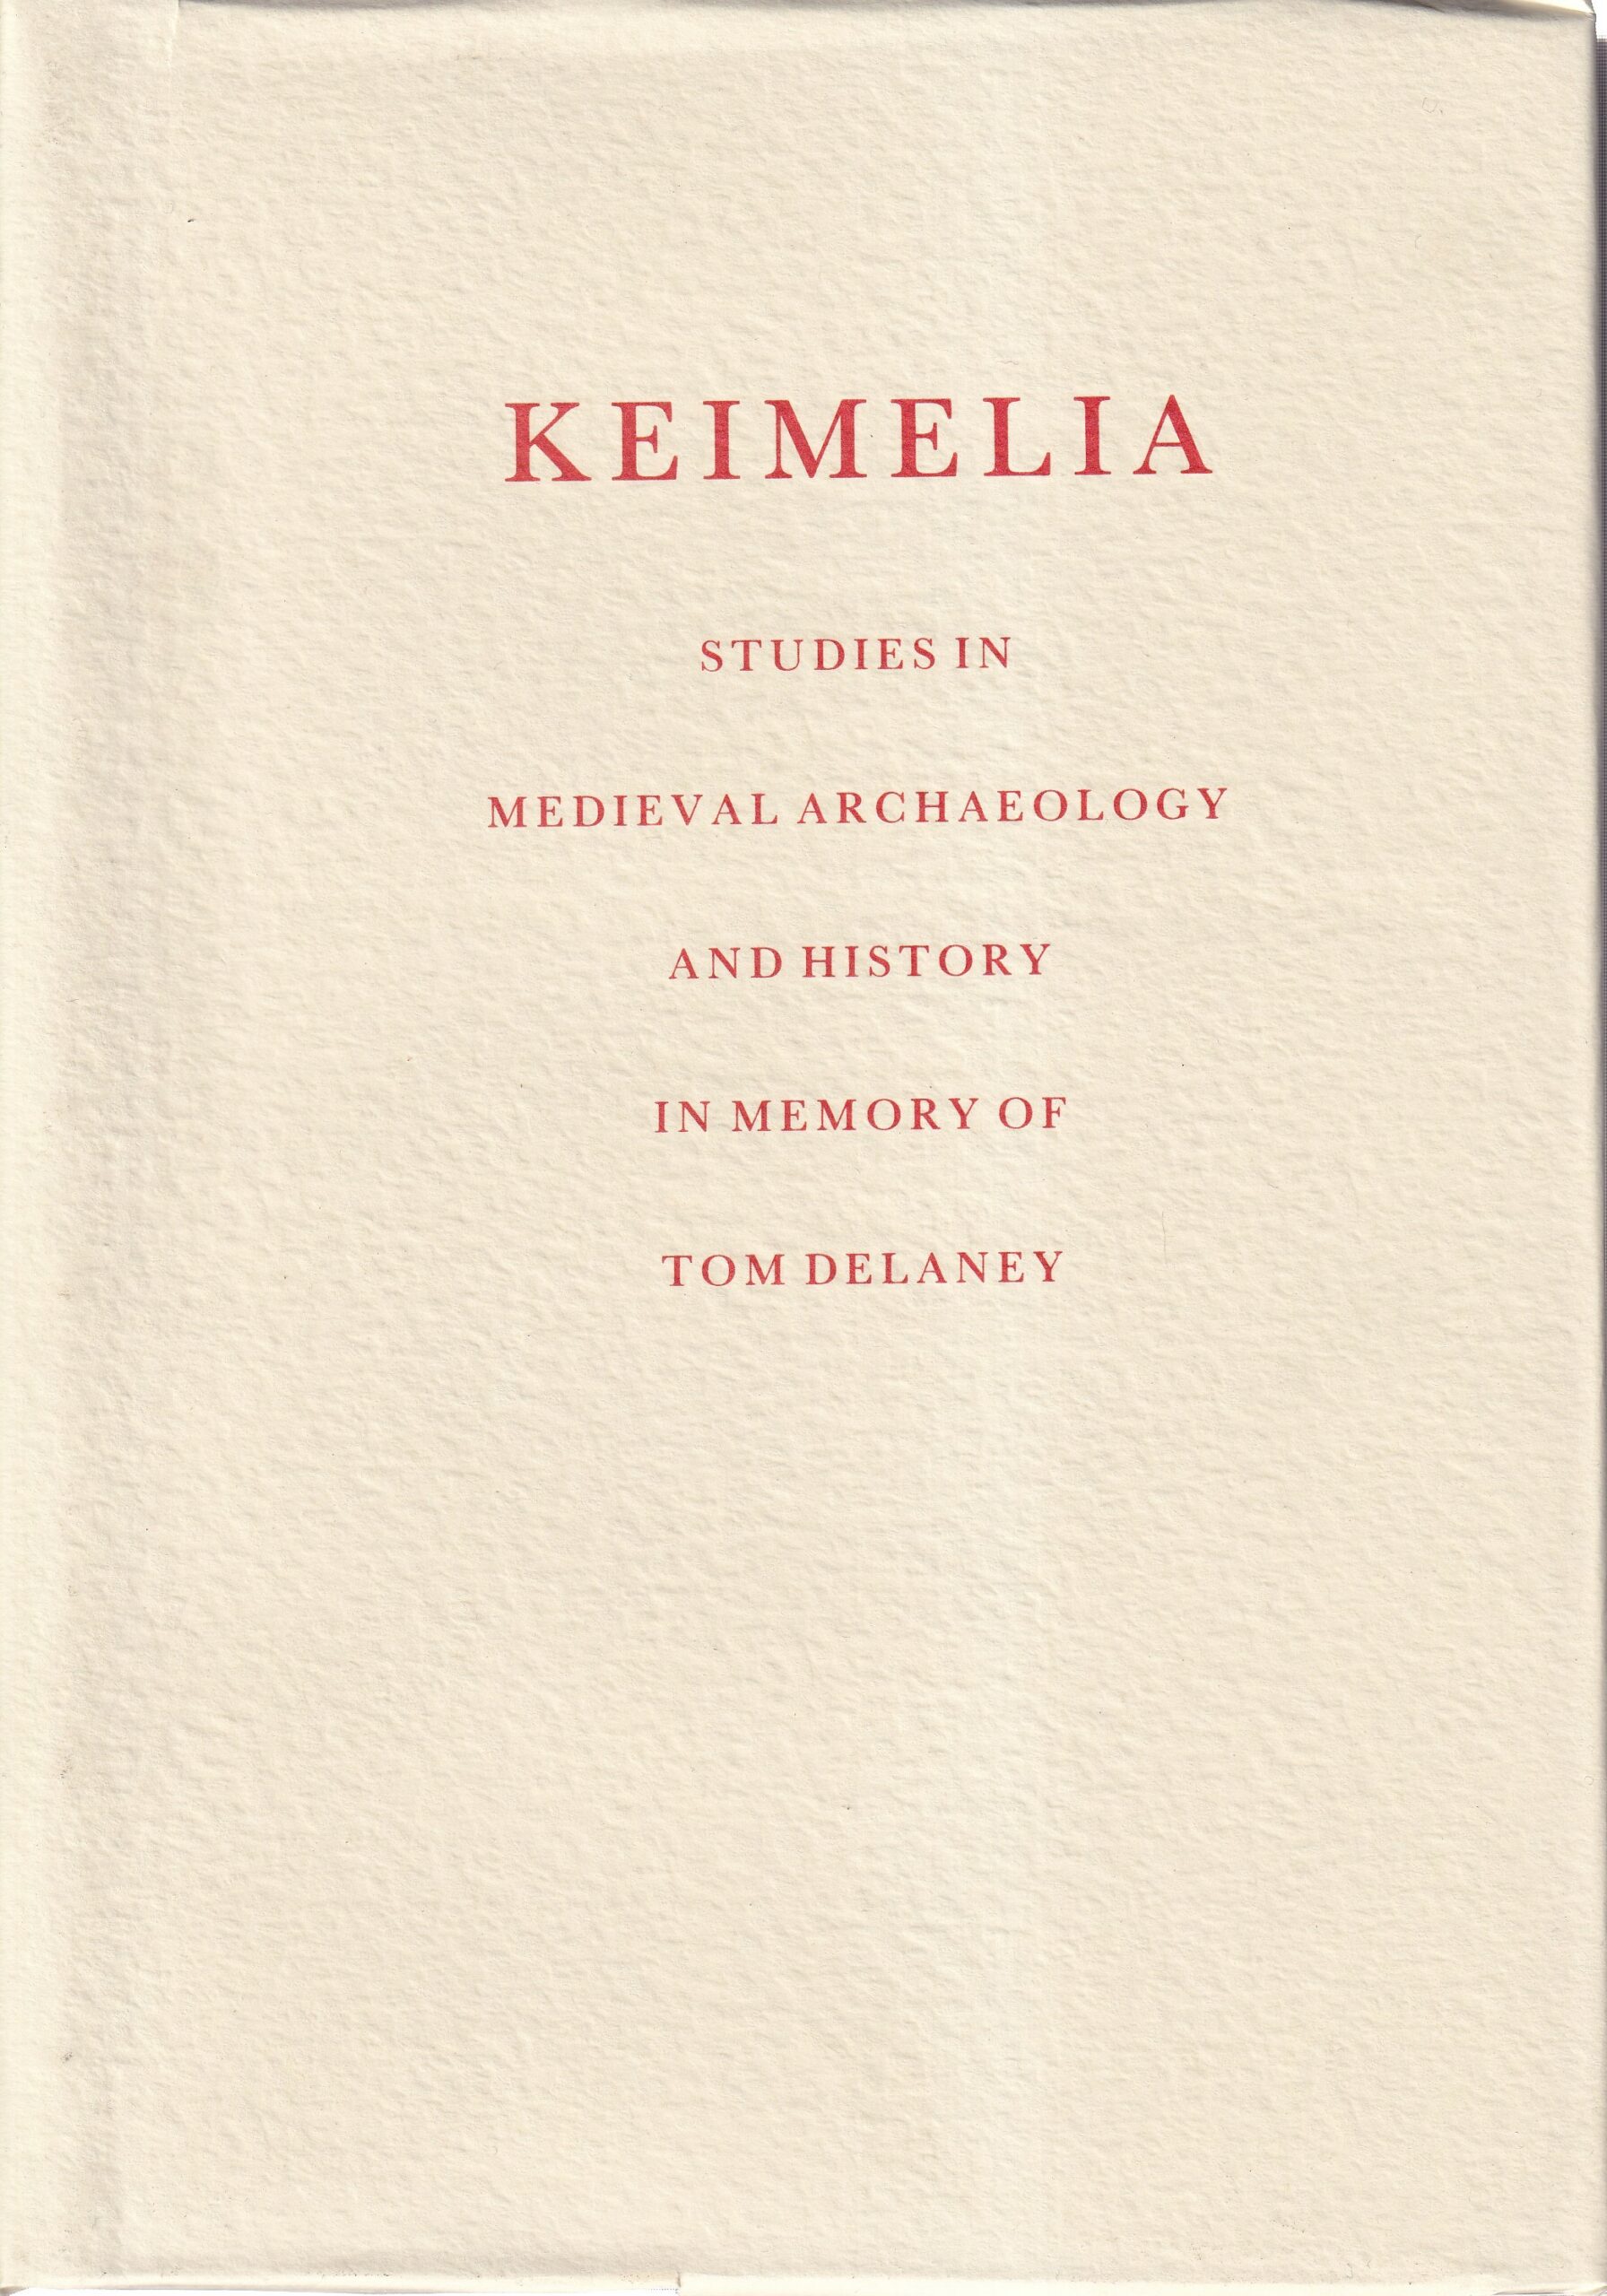 Keimelia: Studies in Medieval Archaeology and History in Memory of Tom Delaney | Gearóid Mac Niocaill and Patrick F. Wallace (eds.) | Charlie Byrne's